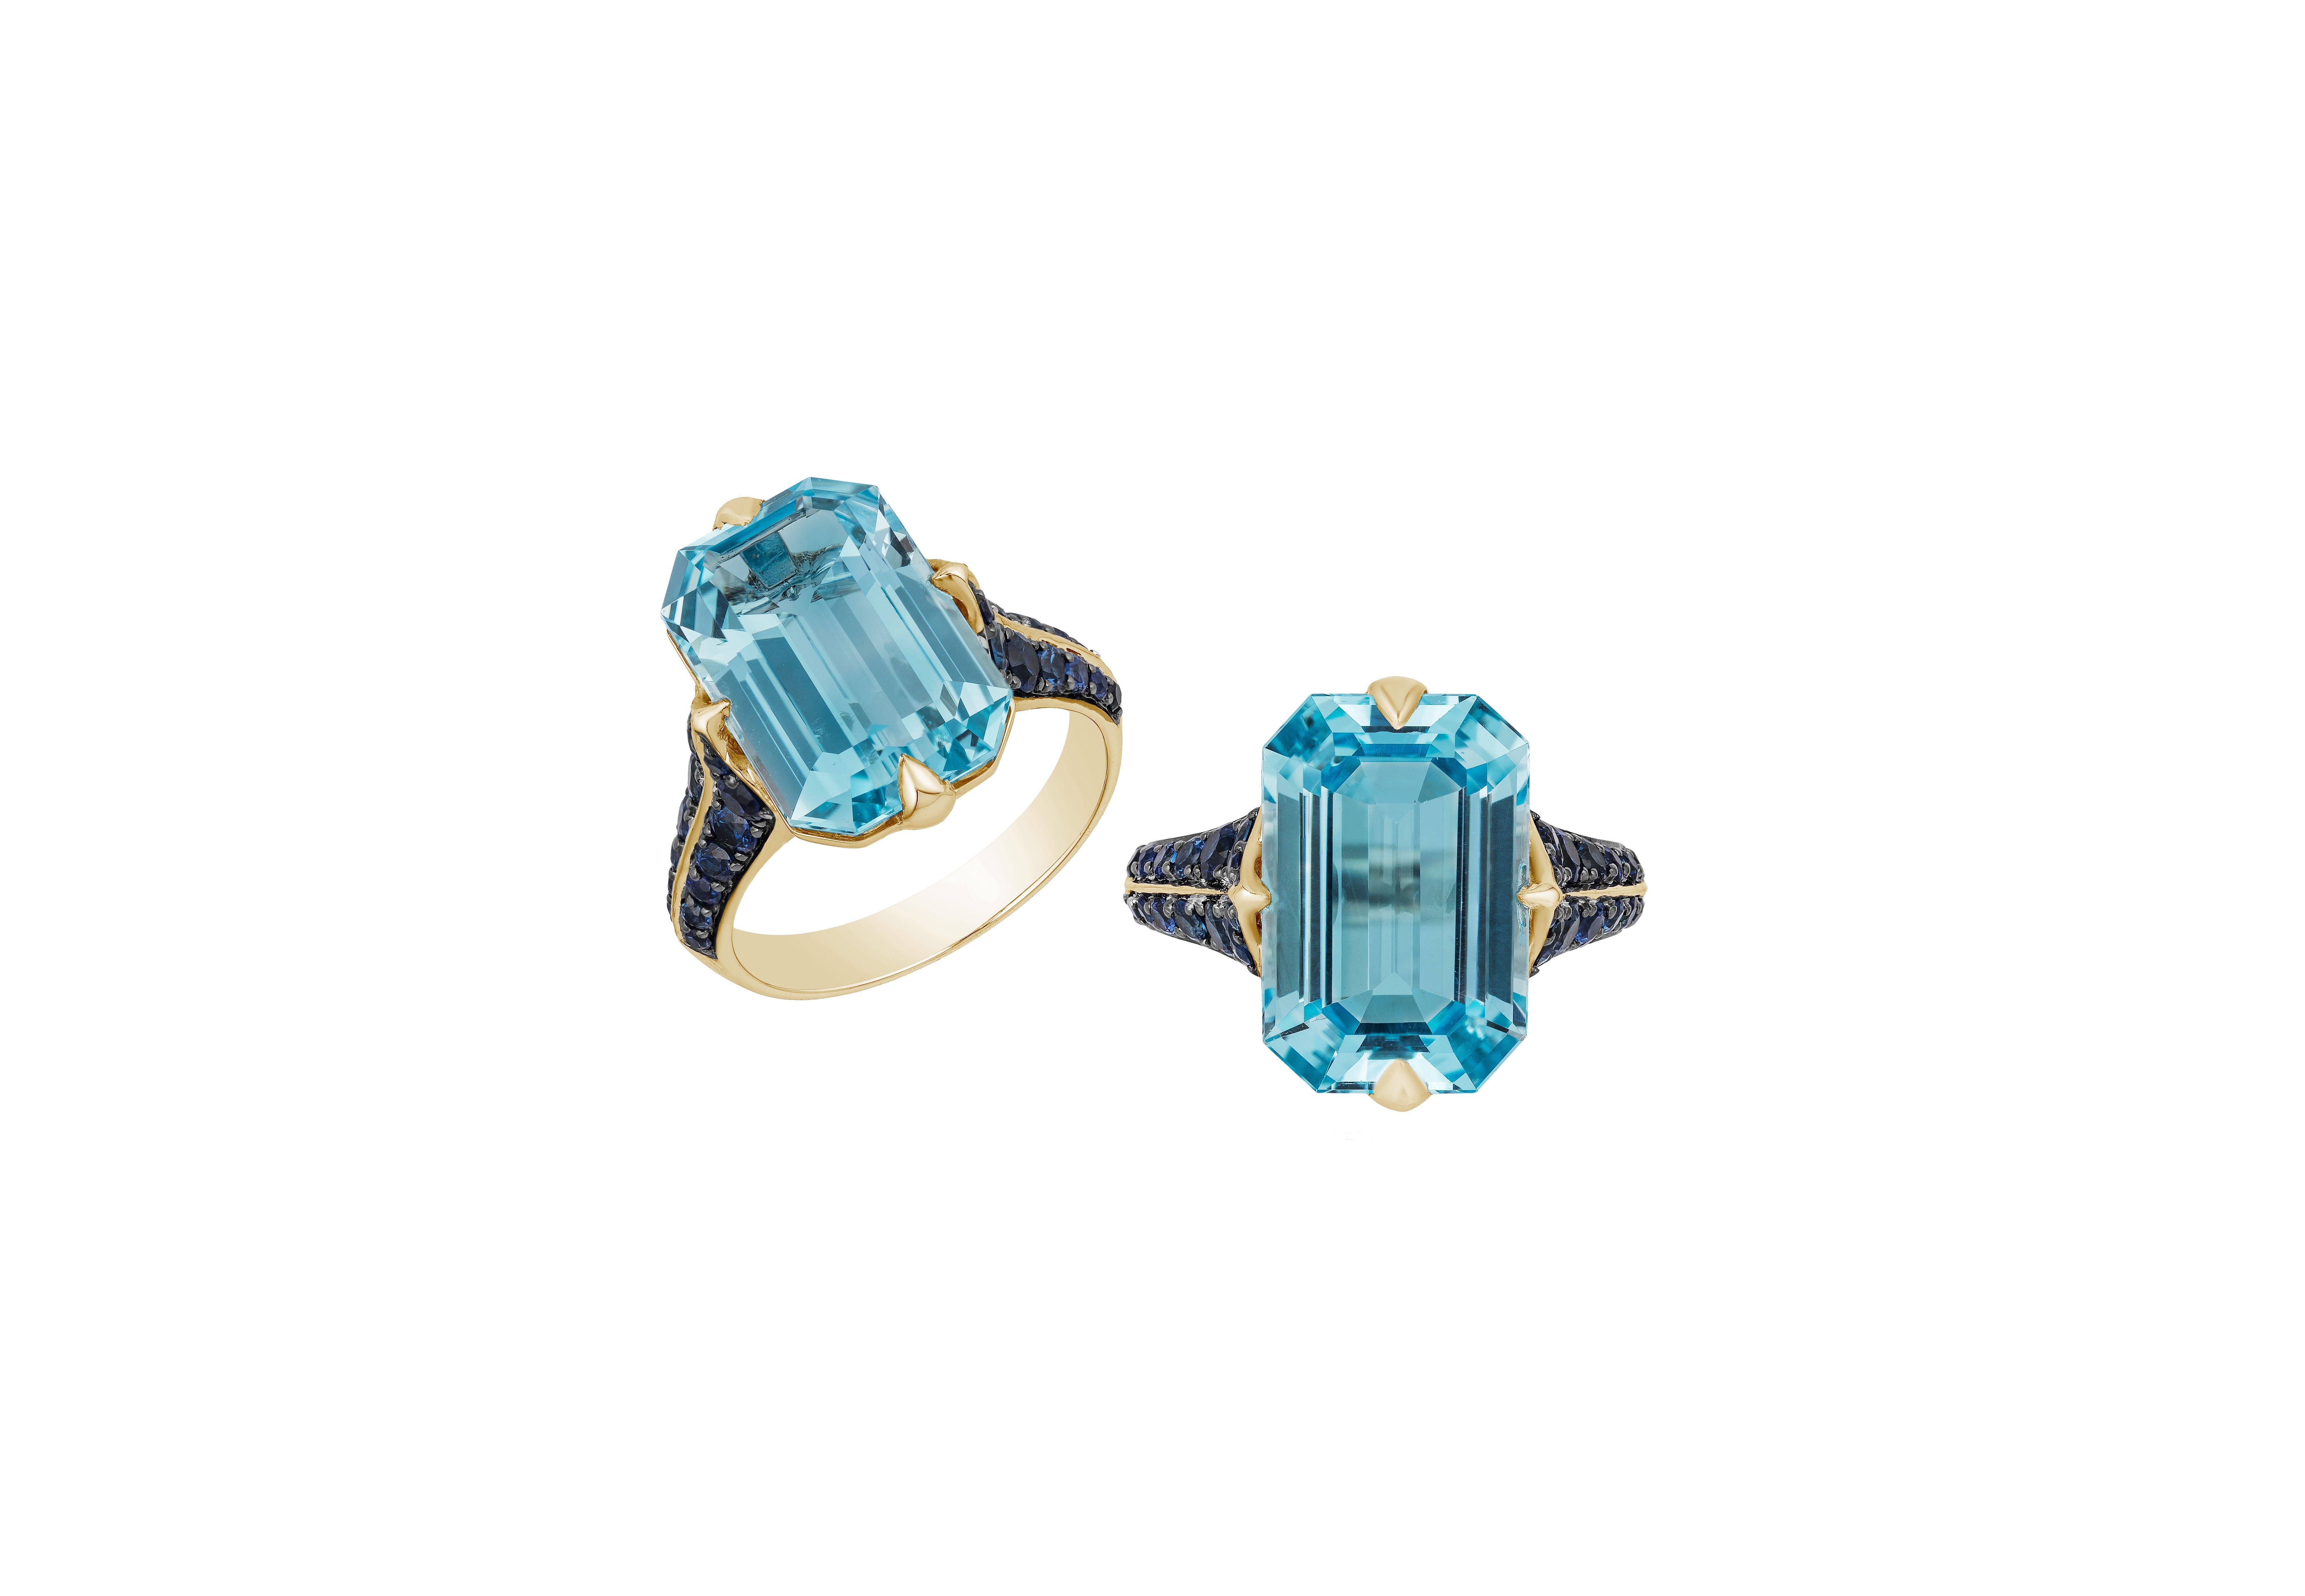 Blue Topaz and Sapphire Ring in 18K Yellow Gold and Light Black Rhodium, from 'Rain-Forest' Collection
Stone Size: 15 x 10 mm
Gemstone Approx. Wt: Blue Topaz- 9.44 Carats
                                      Blue Sapphire- 0.92 Carats